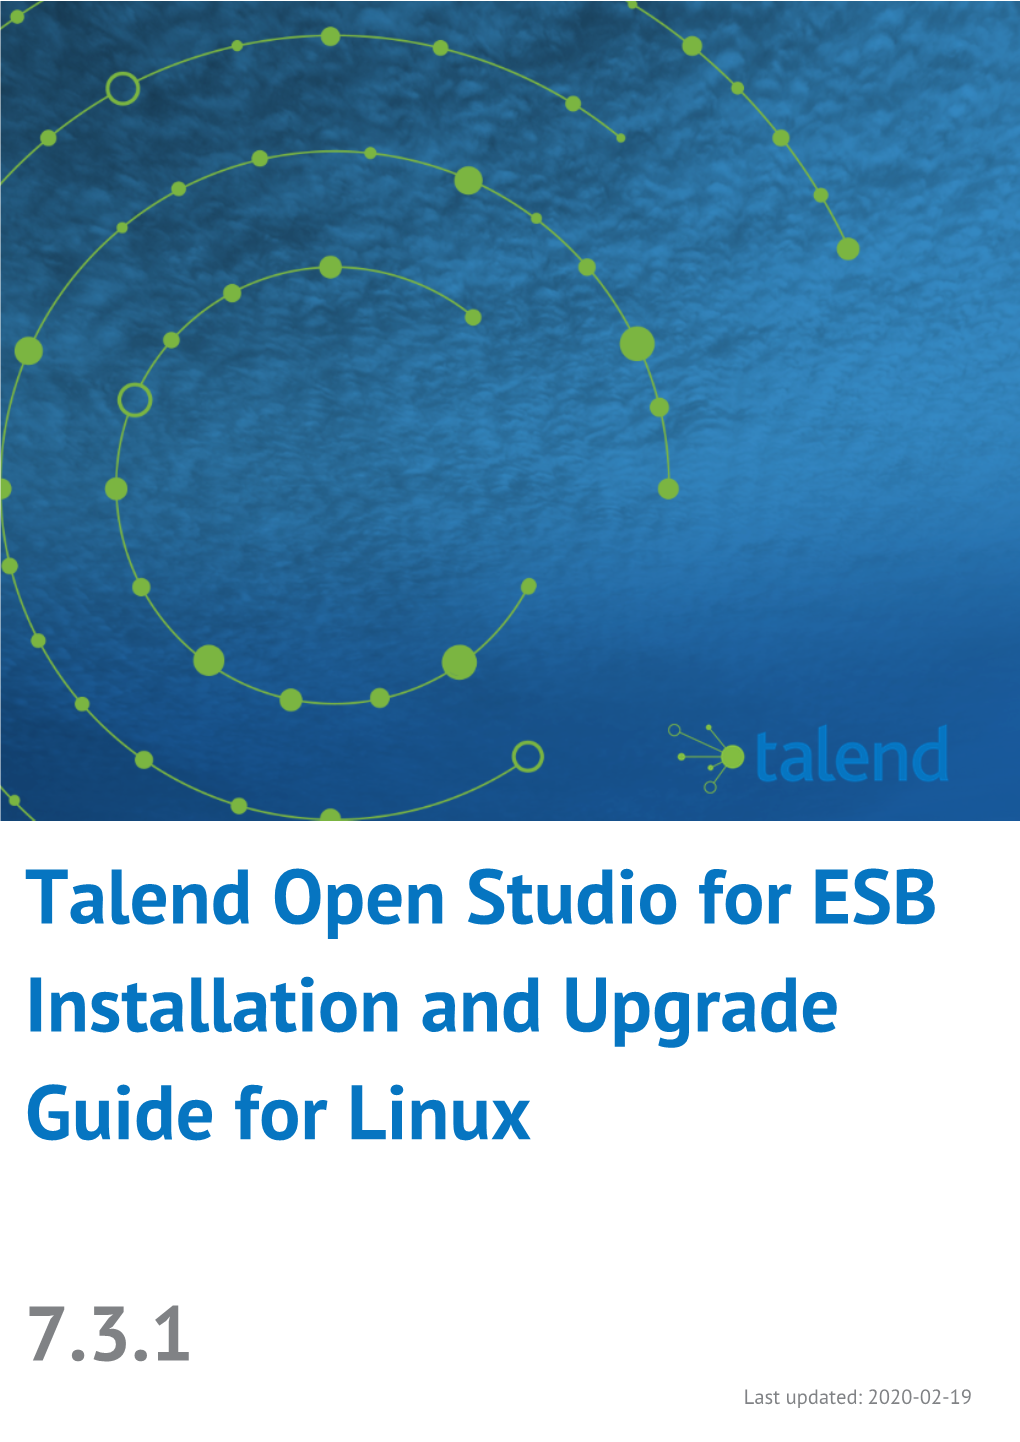 Talend Open Studio for ESB Installation and Upgrade Guide for Linux